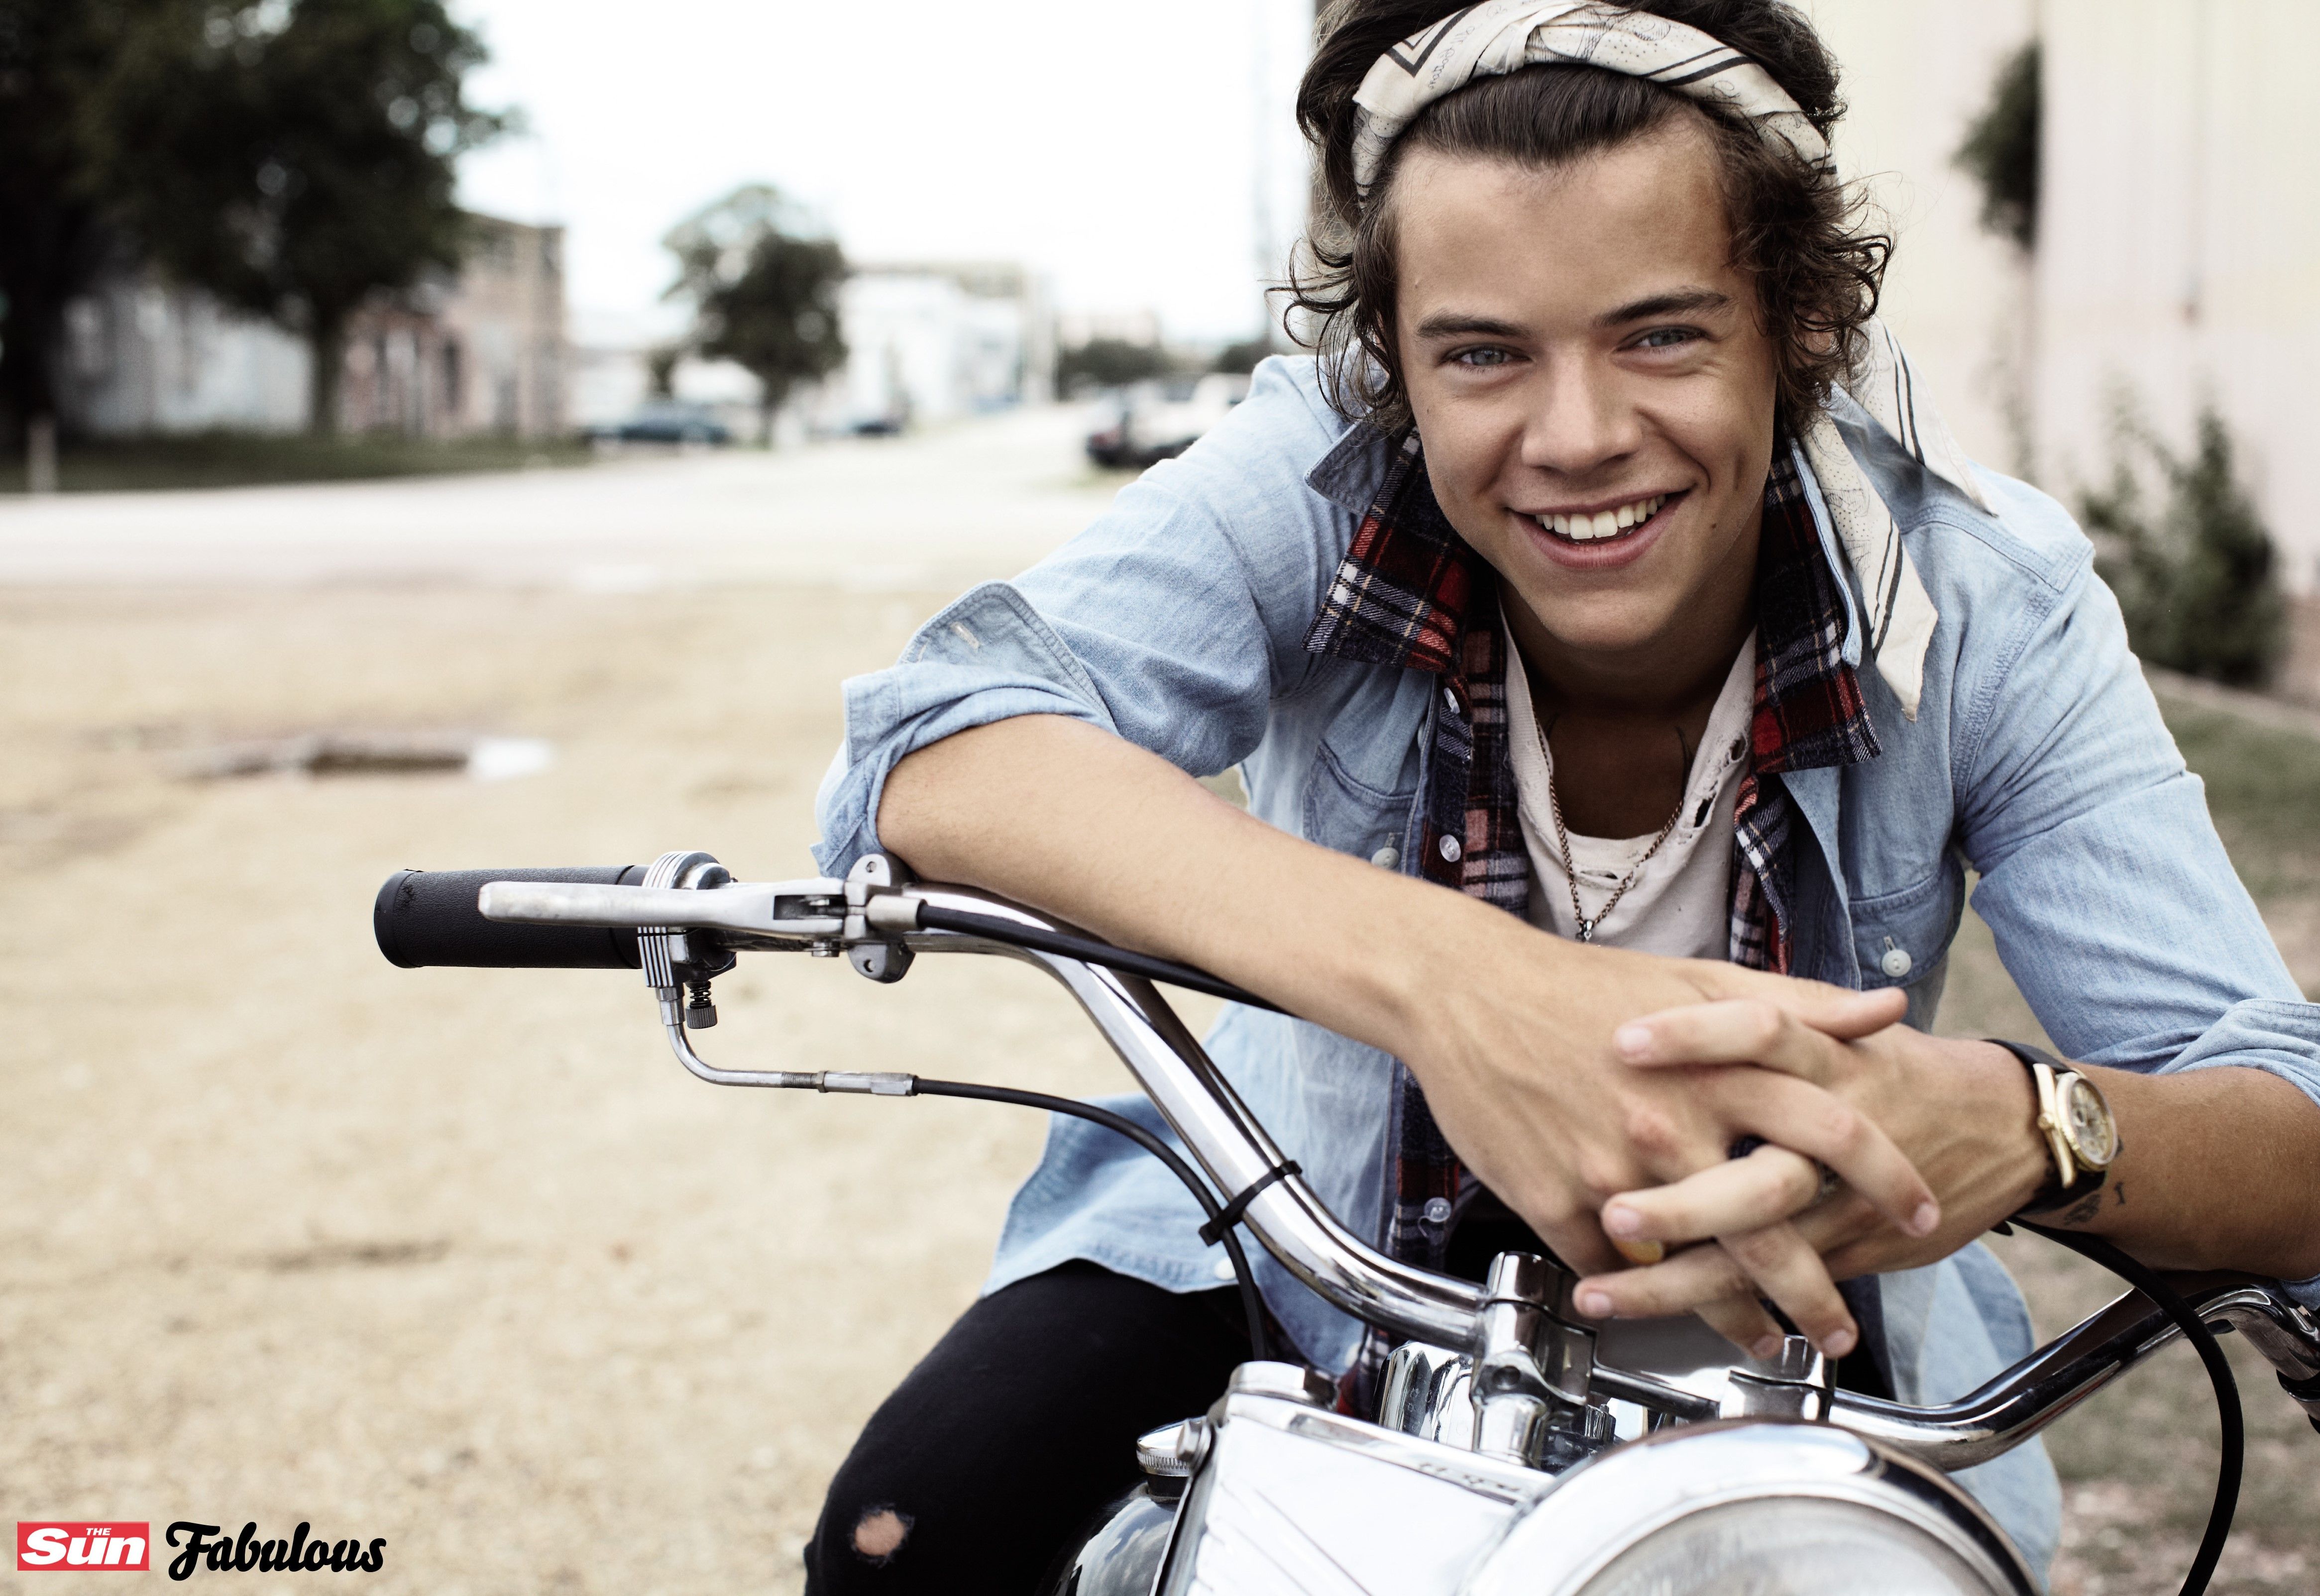 Harry Styles is smiling while sitting on a motorcycle. - One Direction